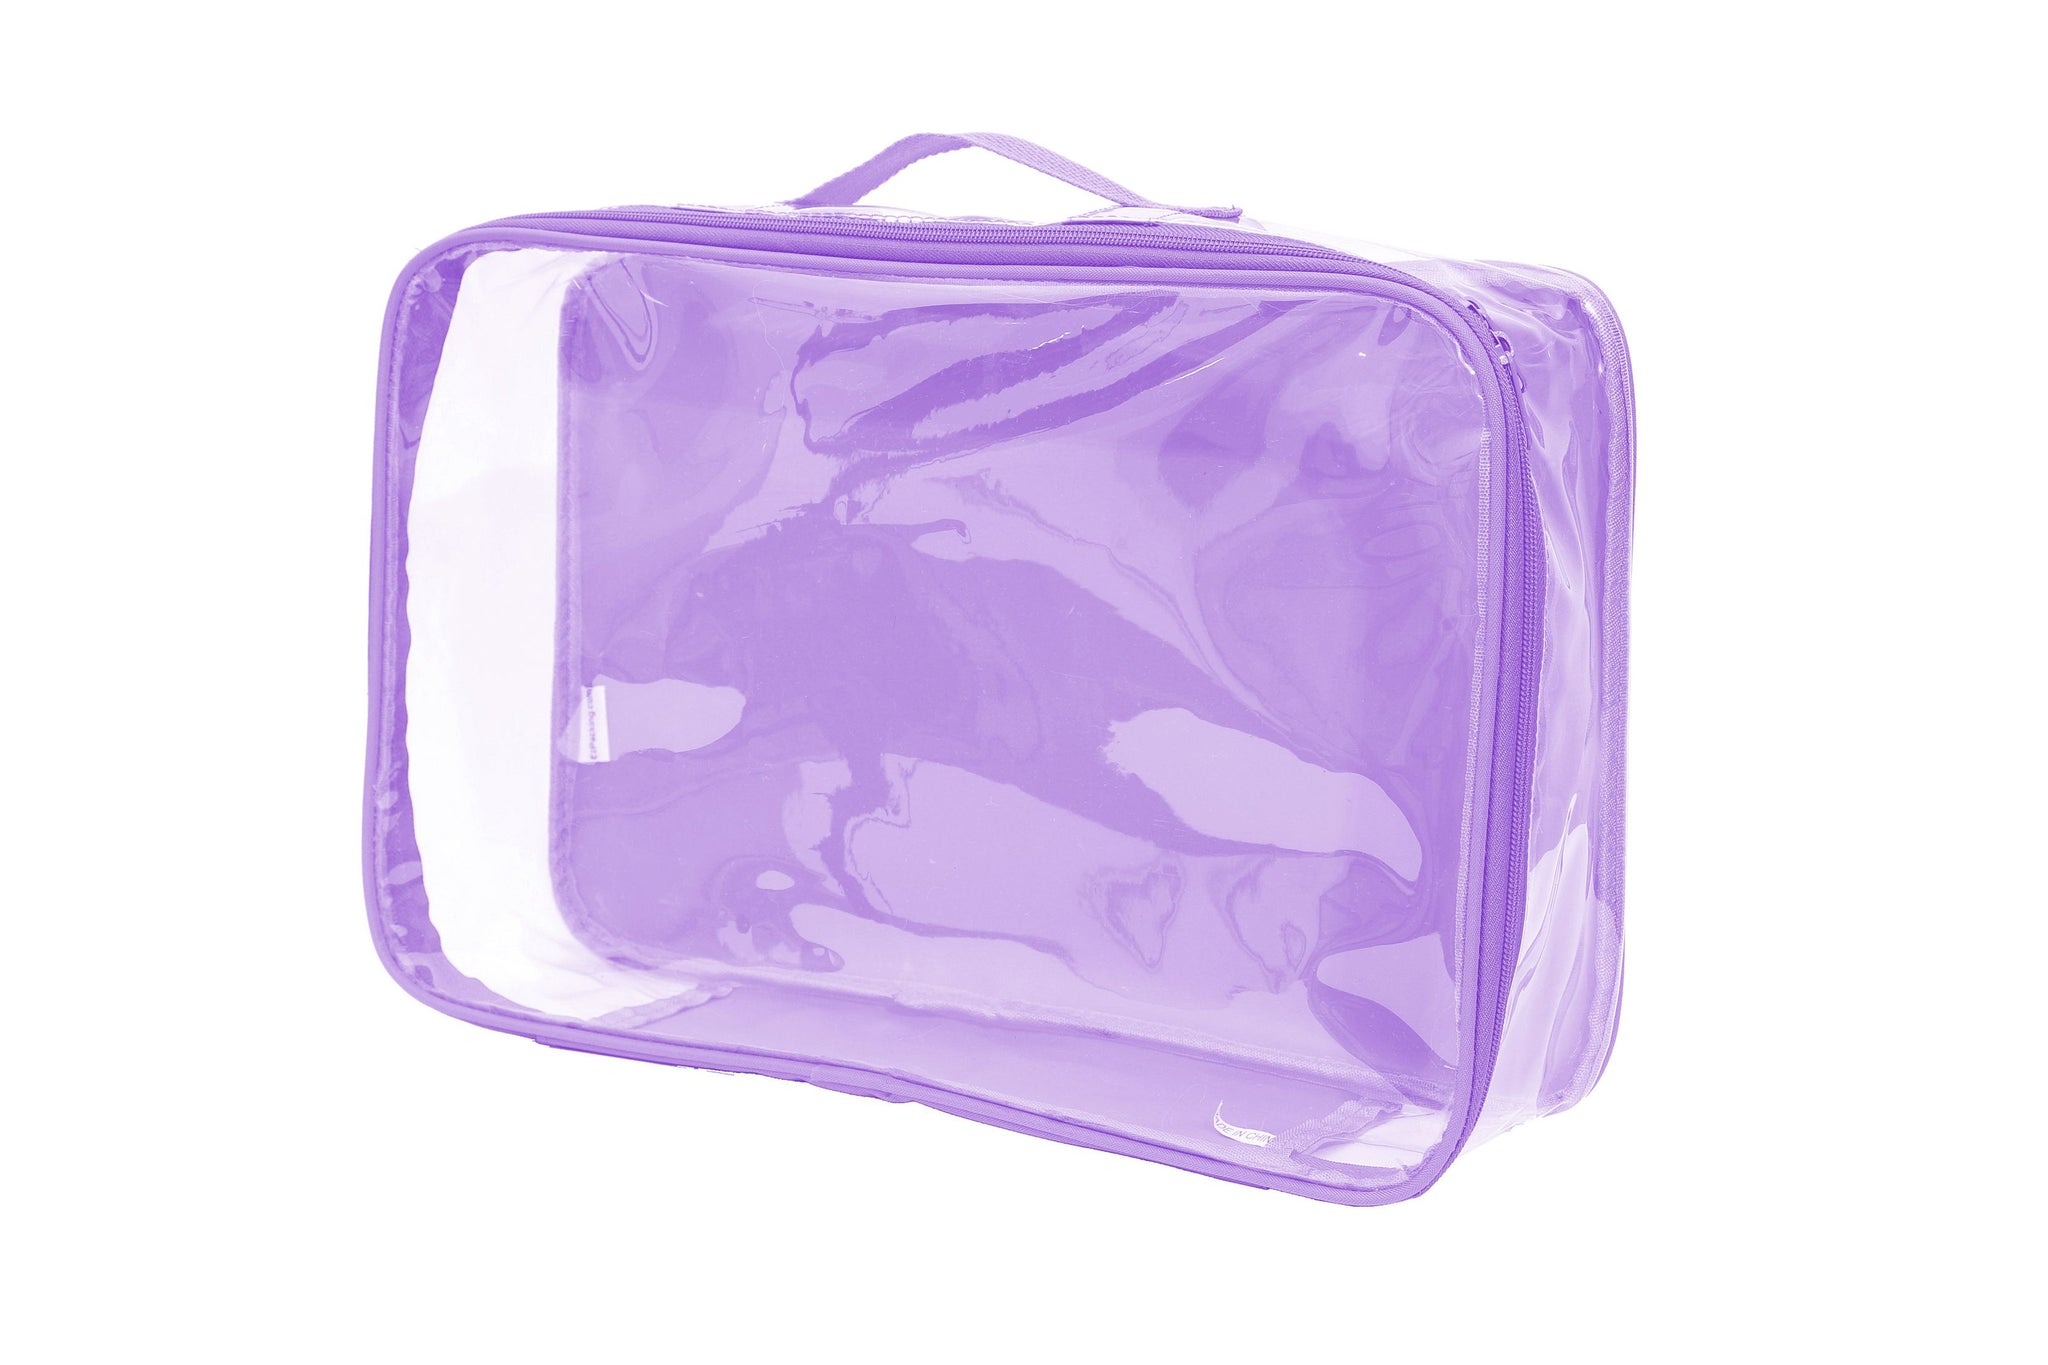 Large Packing Cube for Travel - Clear Suitcase Organizer Pouch with ...